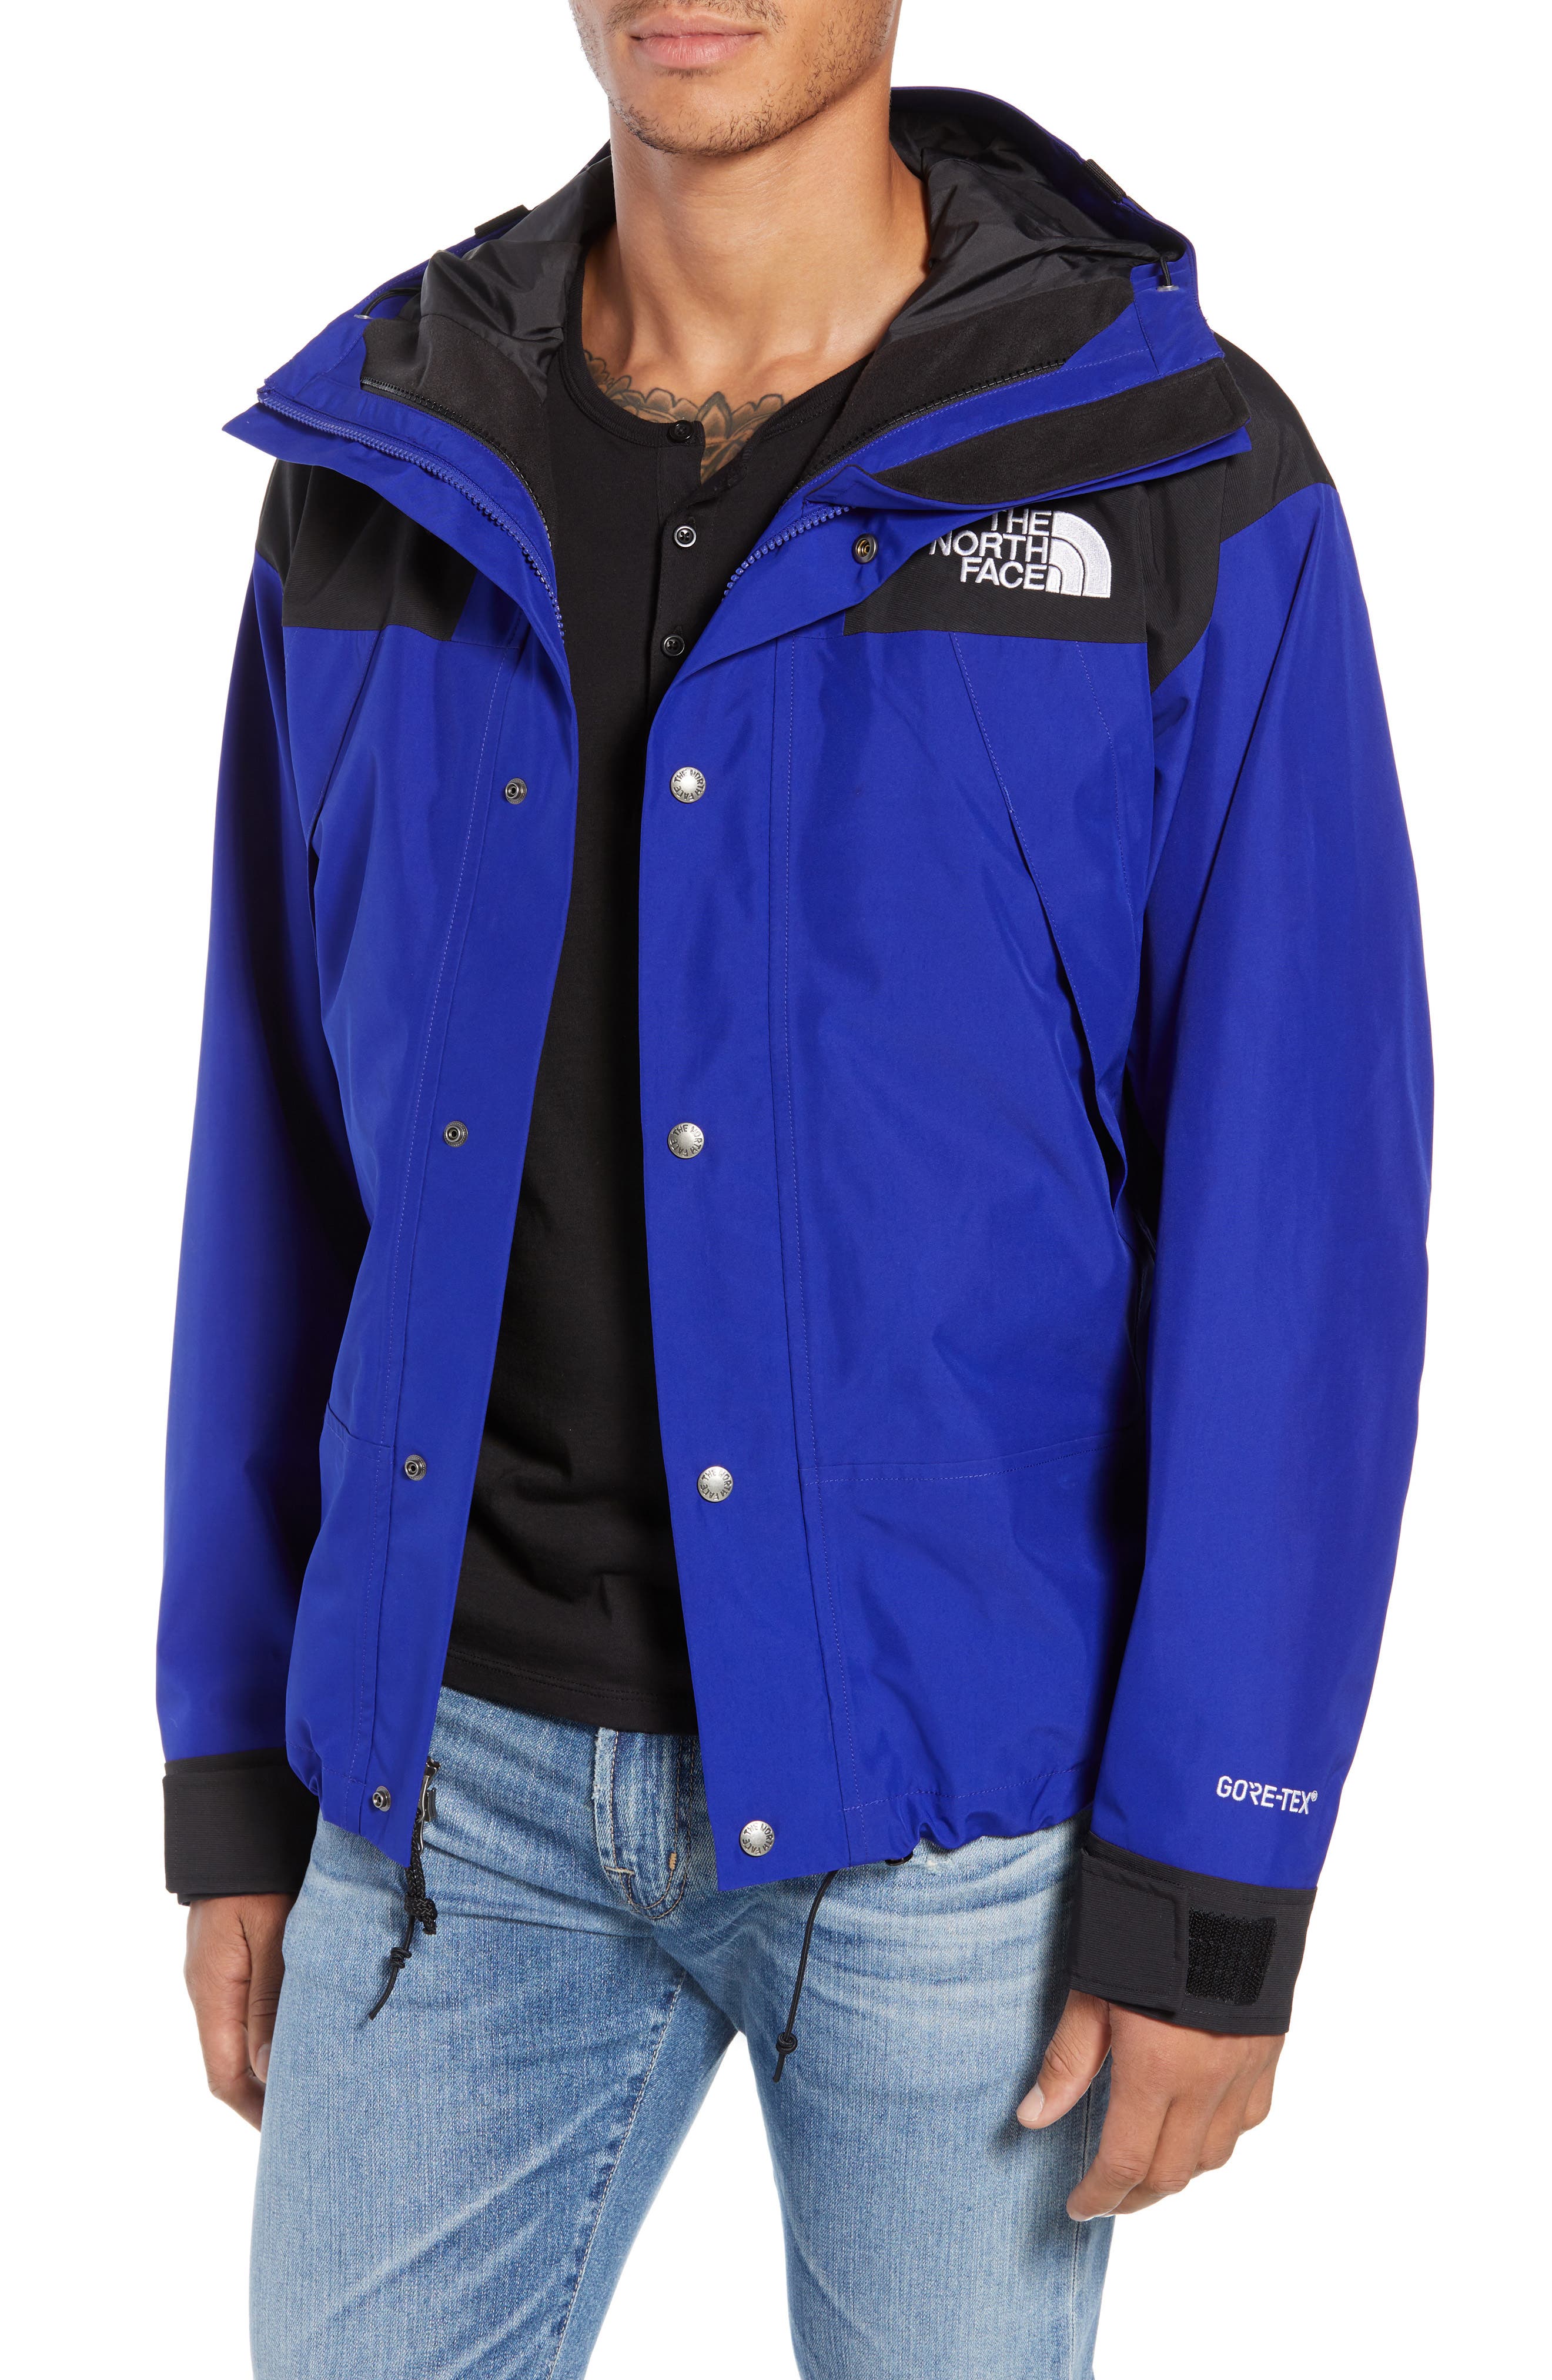 the north face 1990 mountain jacket blue